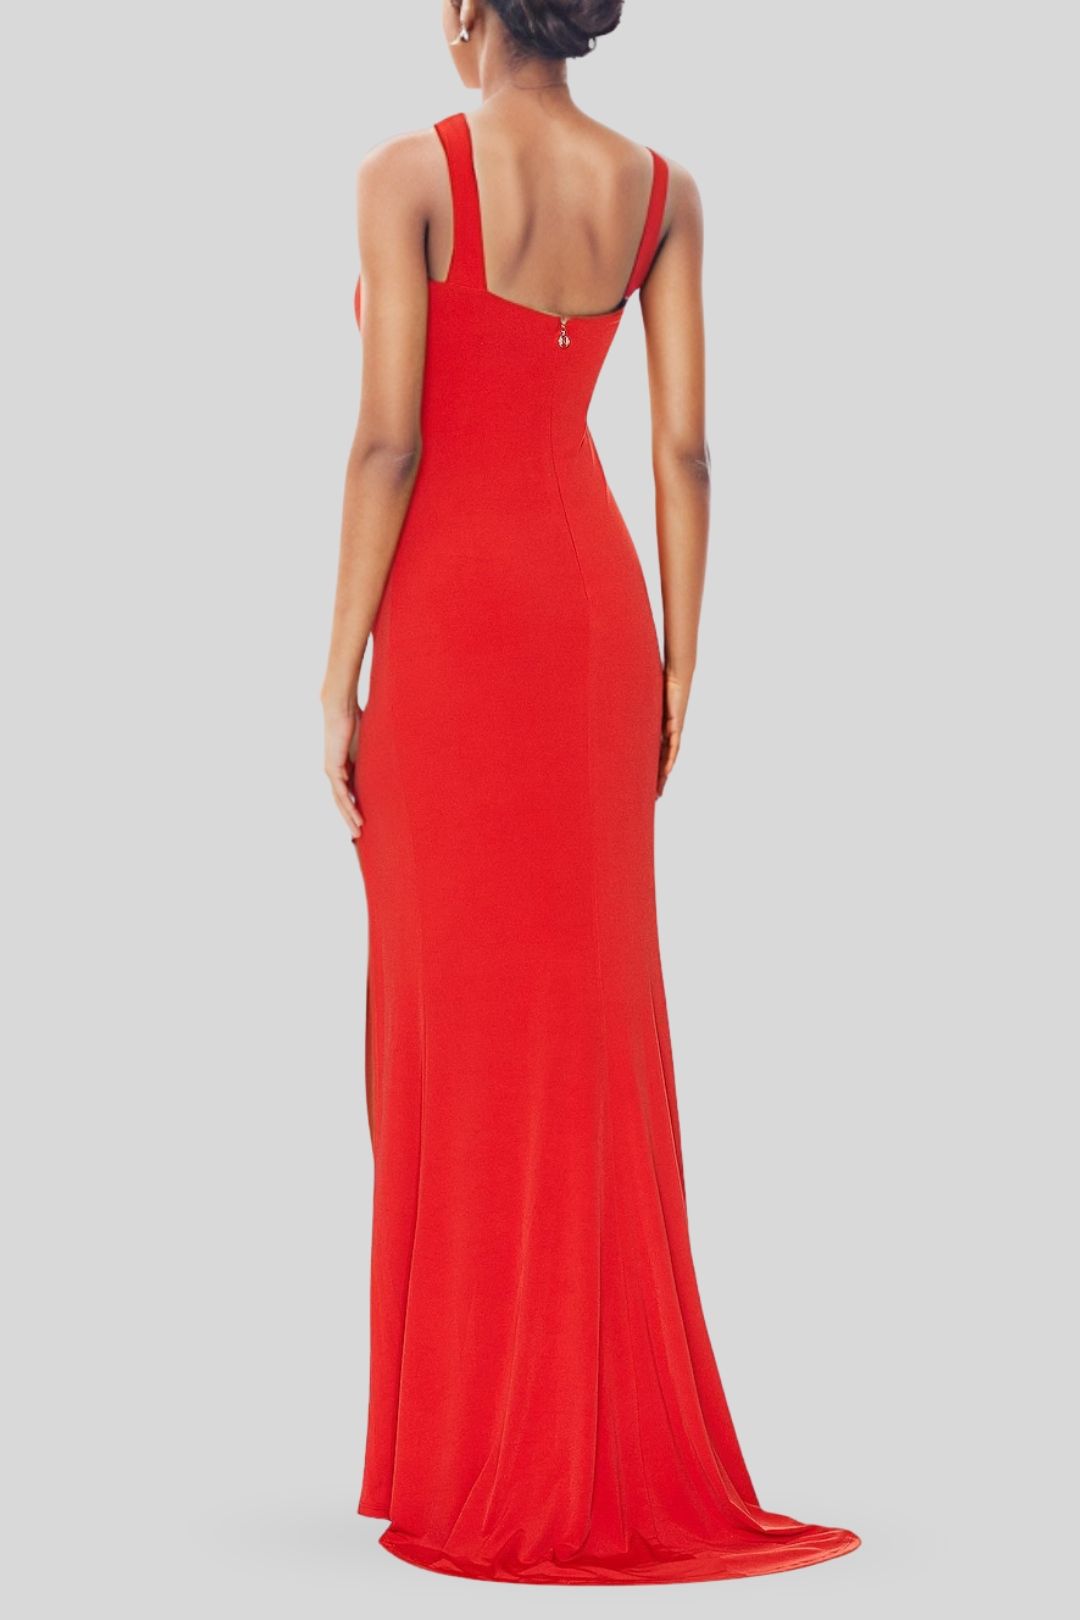 Nookie	Alba Gown in Red Back